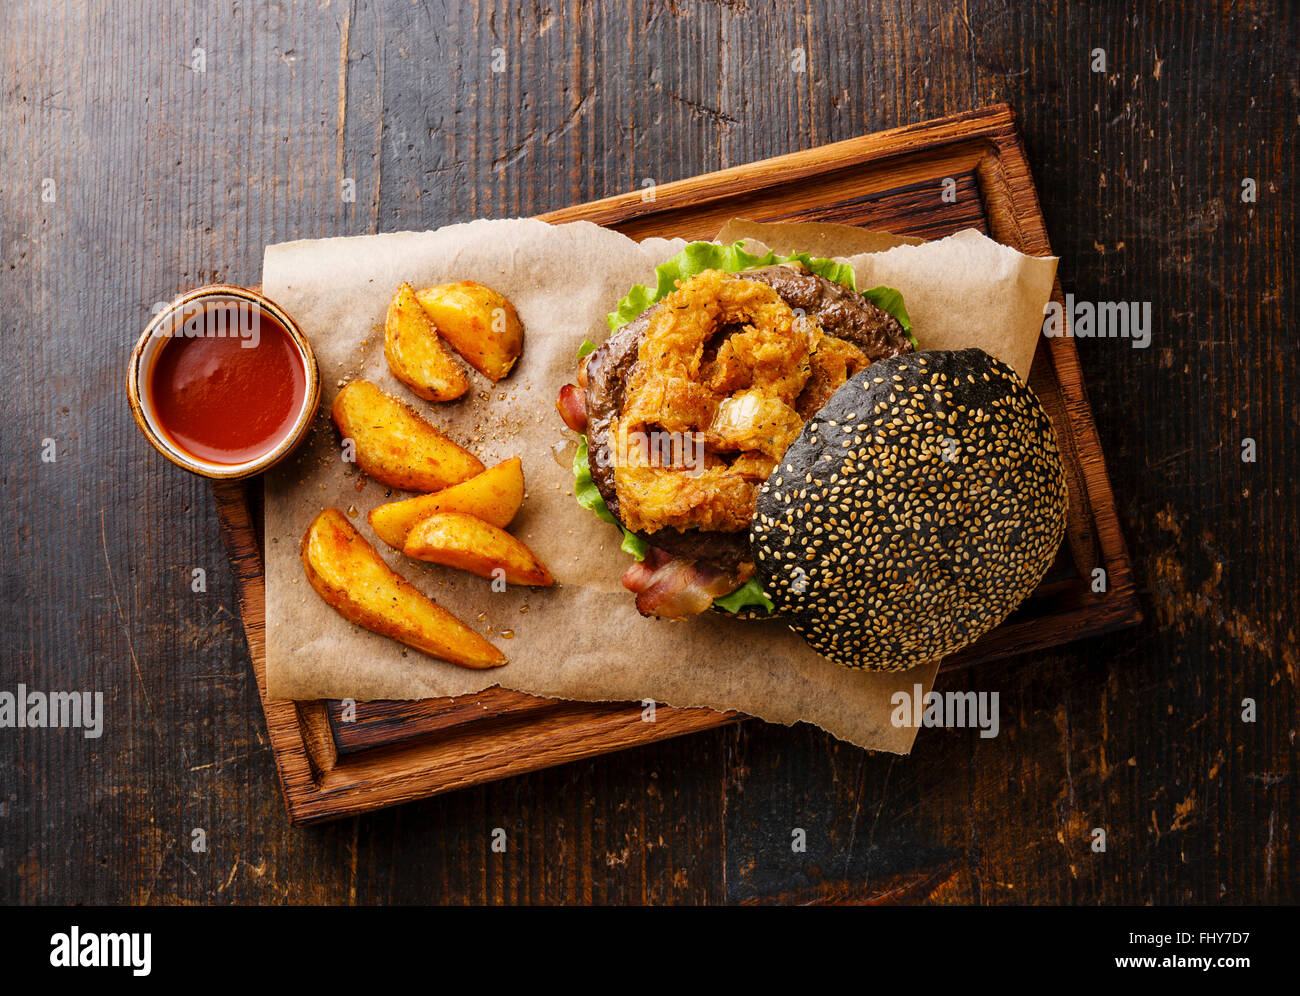 Black burger with sesame seed bun meat bacon onion rings fries and potato wedges on dark wooden background Stock Photo